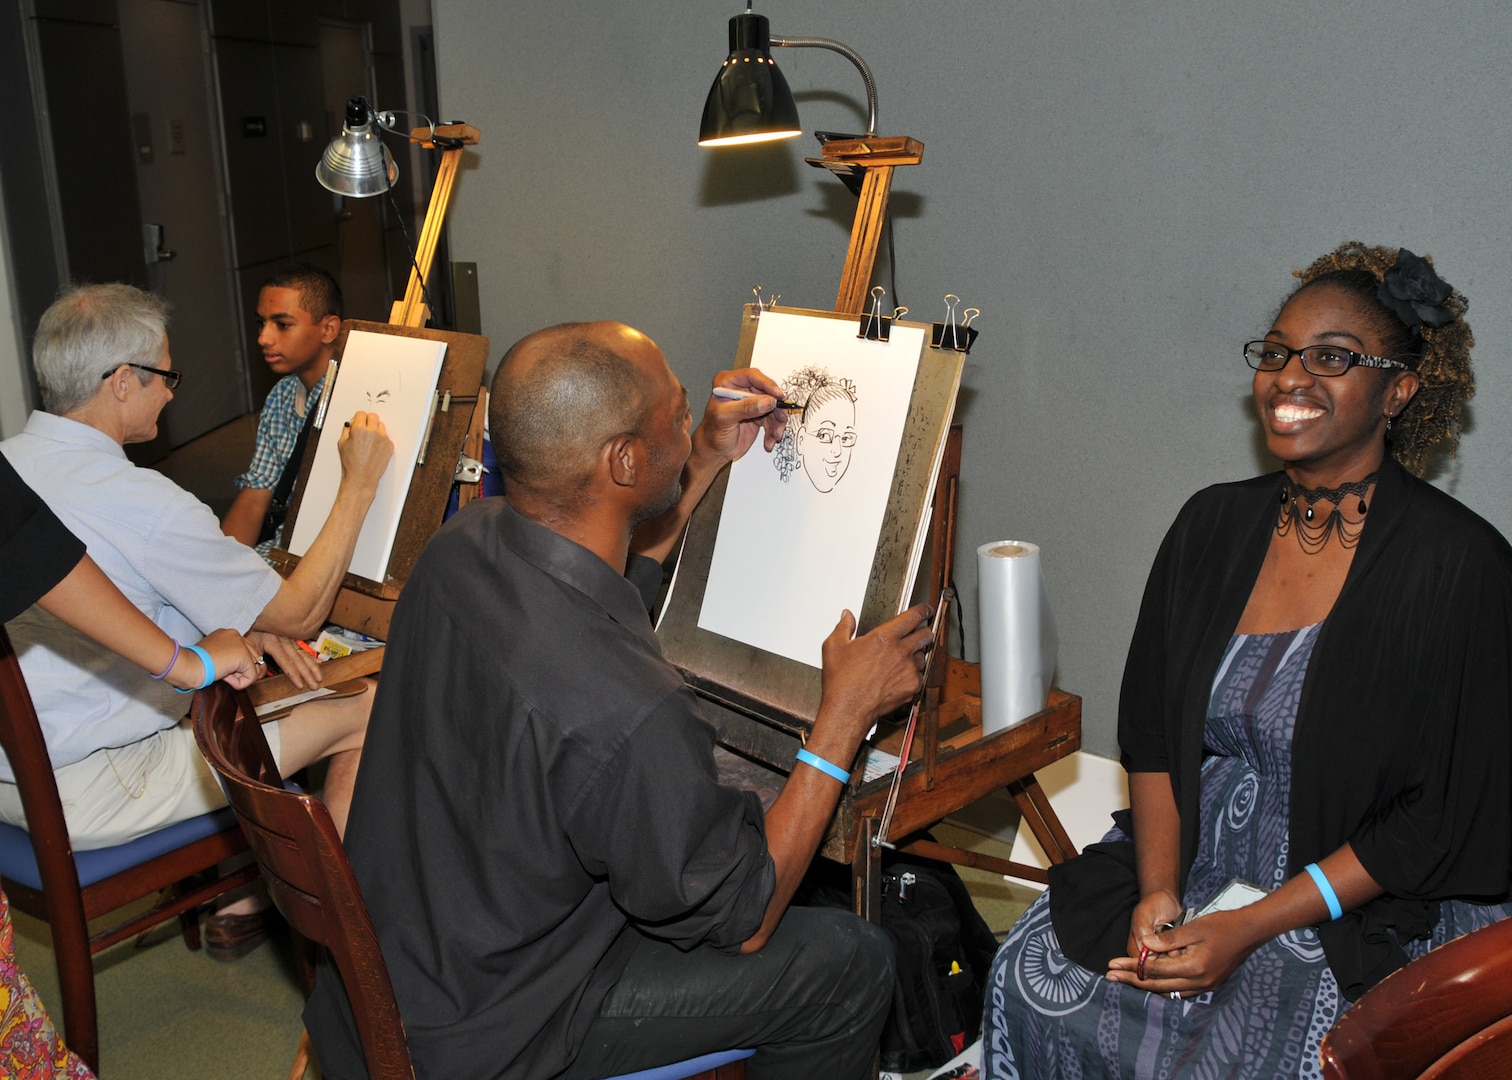 Employees and family members sit for free caricatures on Family Day at the McNamara Headquarters Complex.